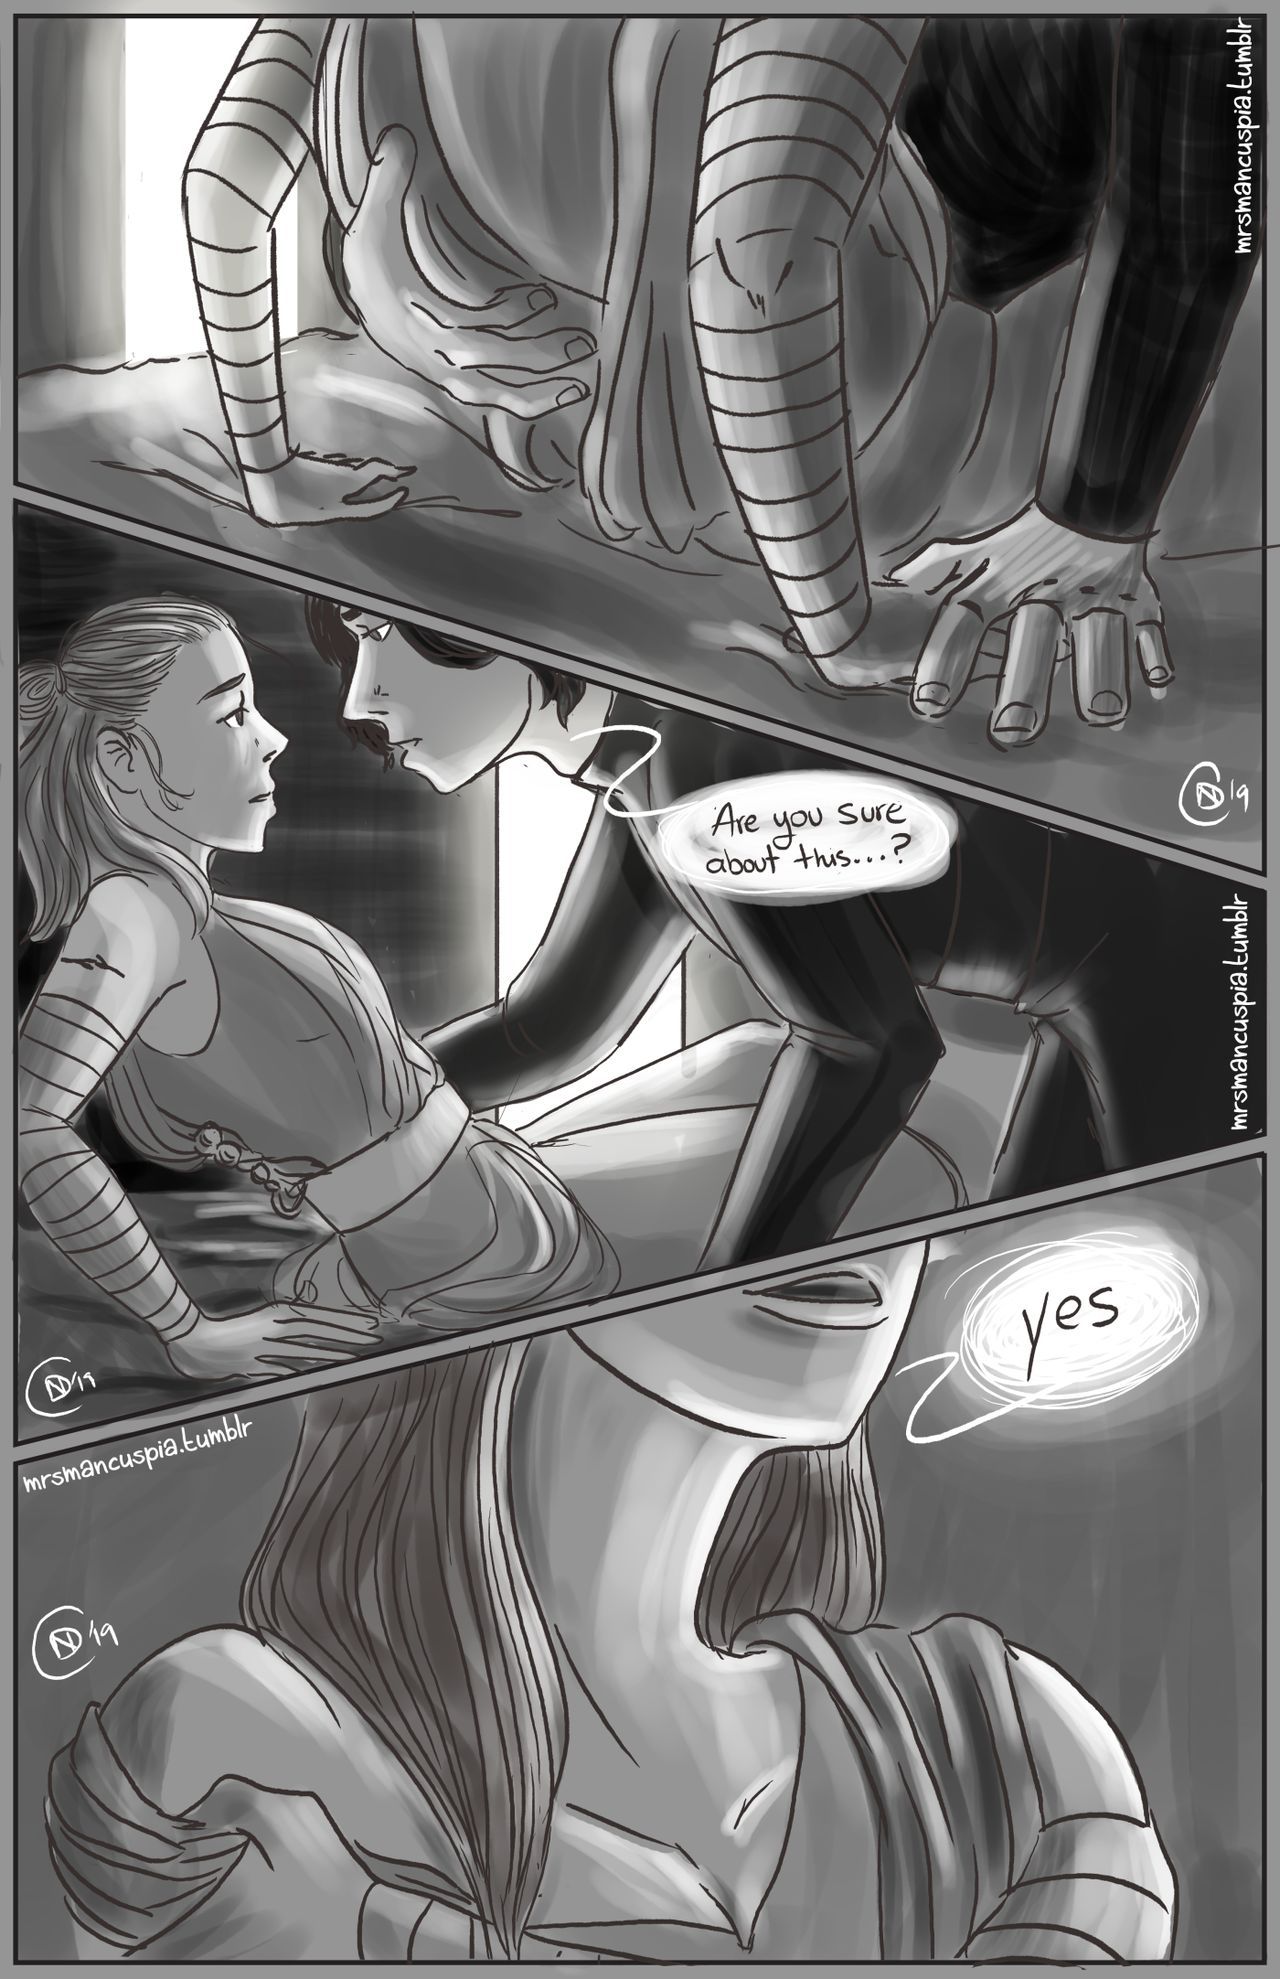 [Mrs Mancuspia] Bedroom Learning (Star Wars) [Ongoing] 13